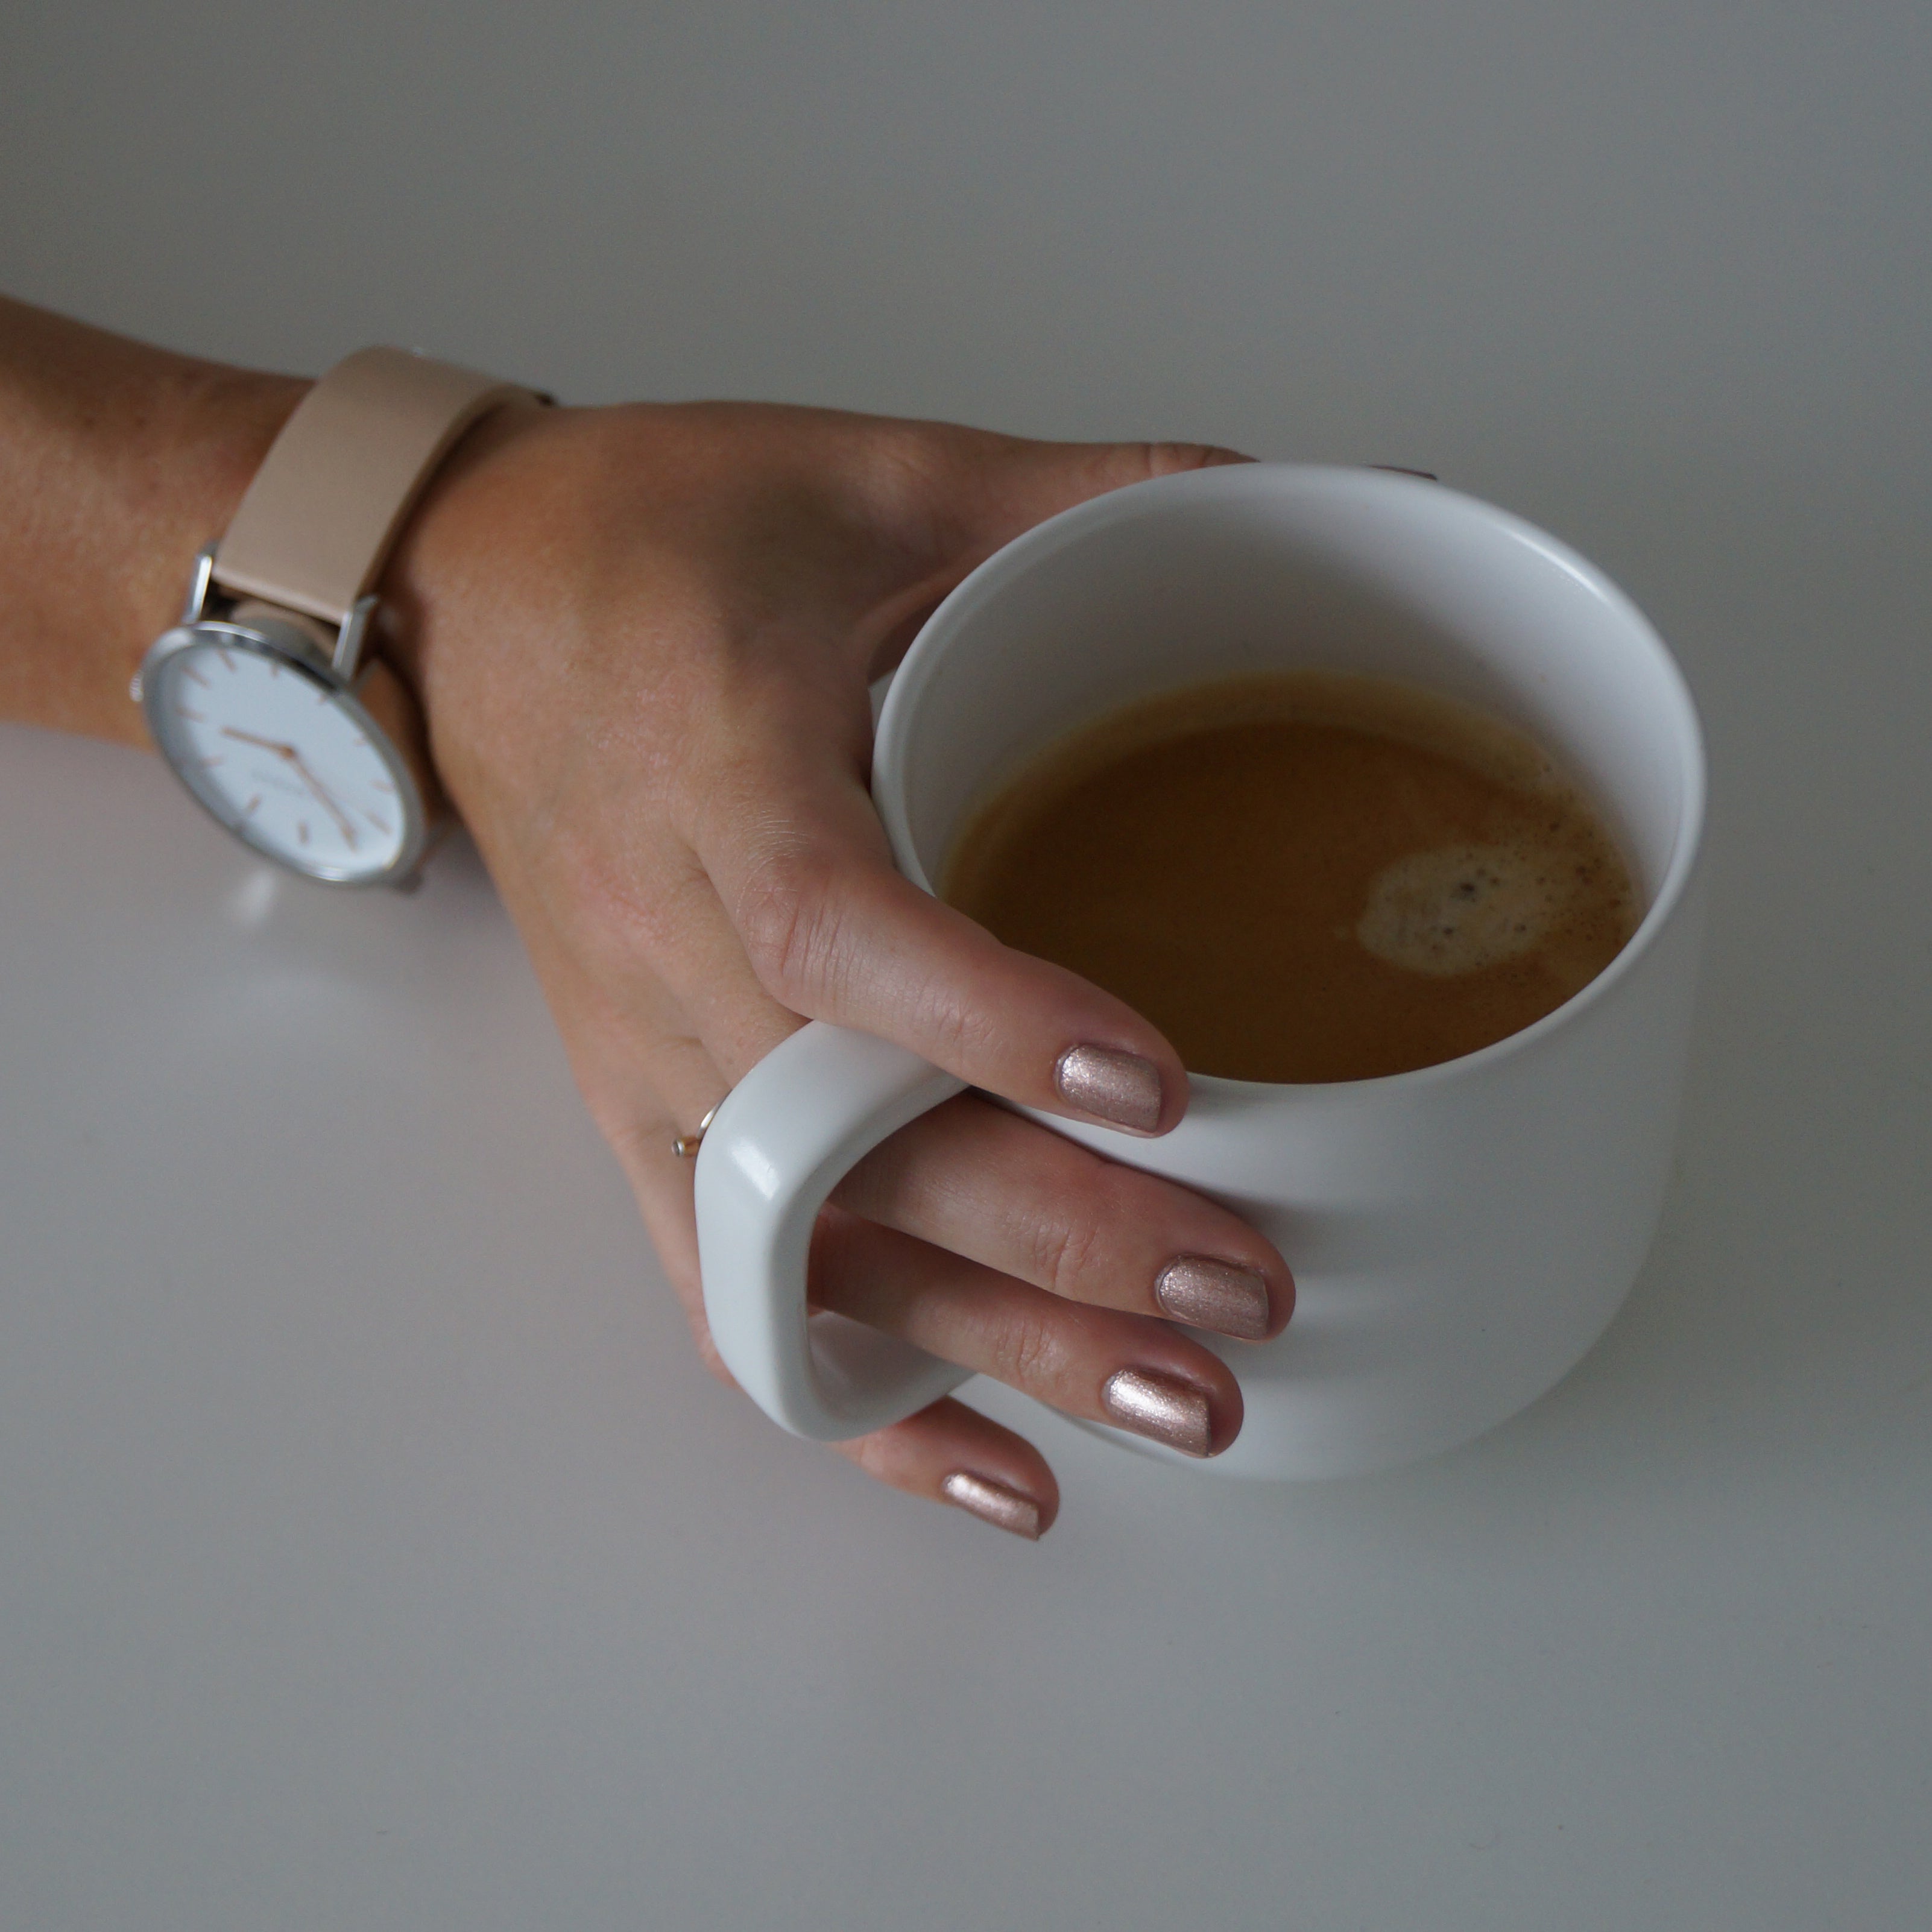 A female hand holding a cup of coffee, wearing Copper Blush nail poilsh - a metallic dark pink colour with gold undertones